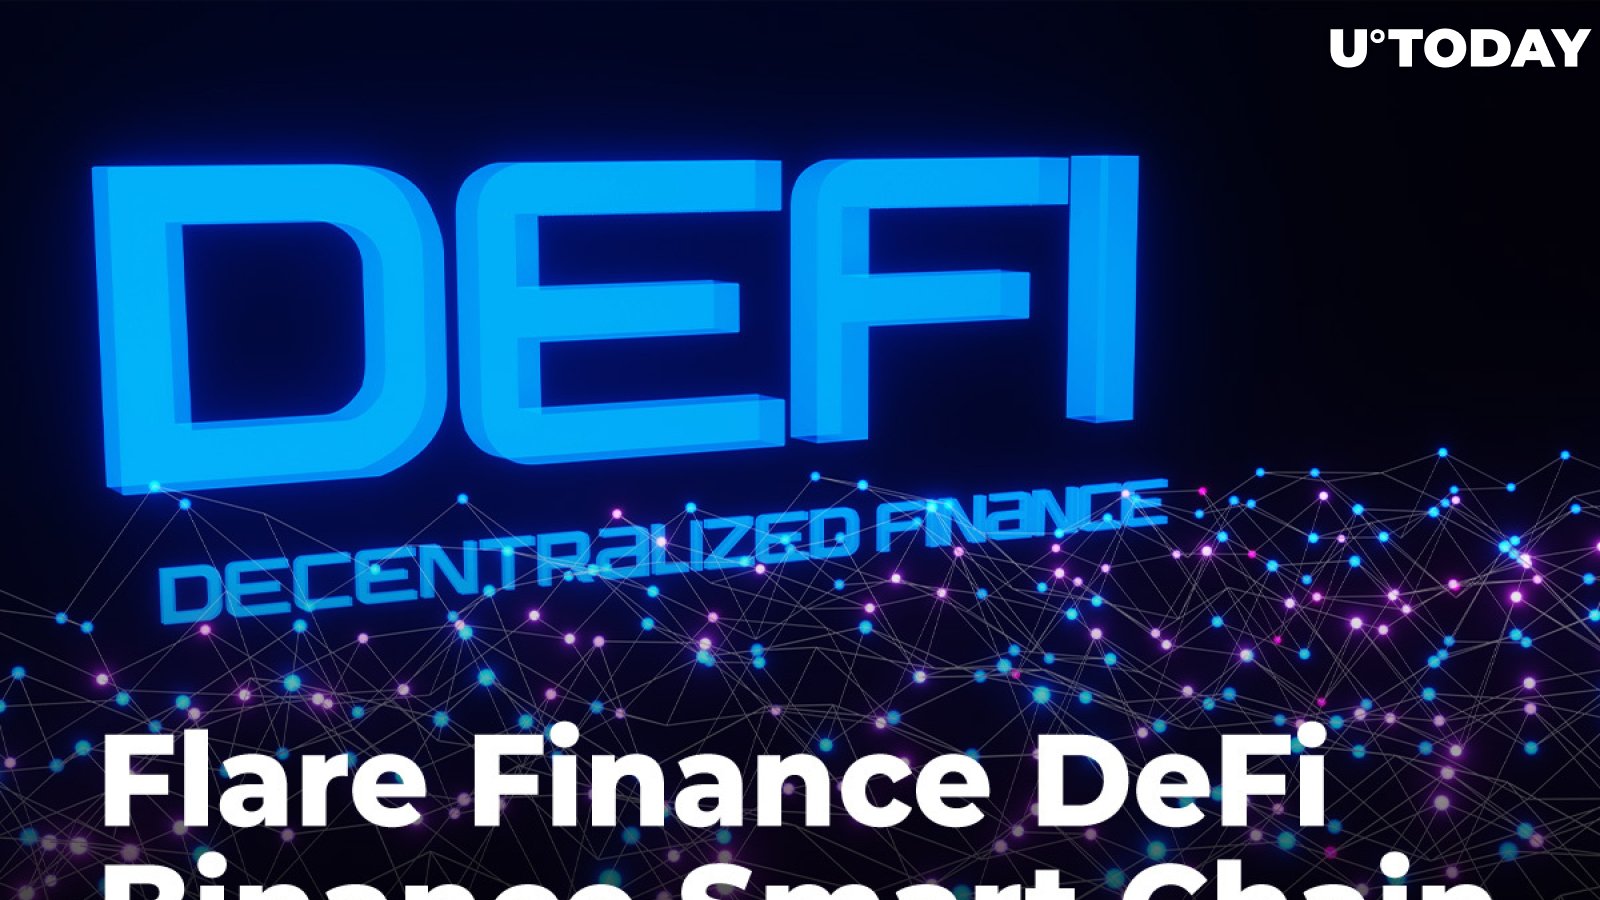 Flare Finance DeFi Integrates Binance Smart Chain Assets. Which Ones?